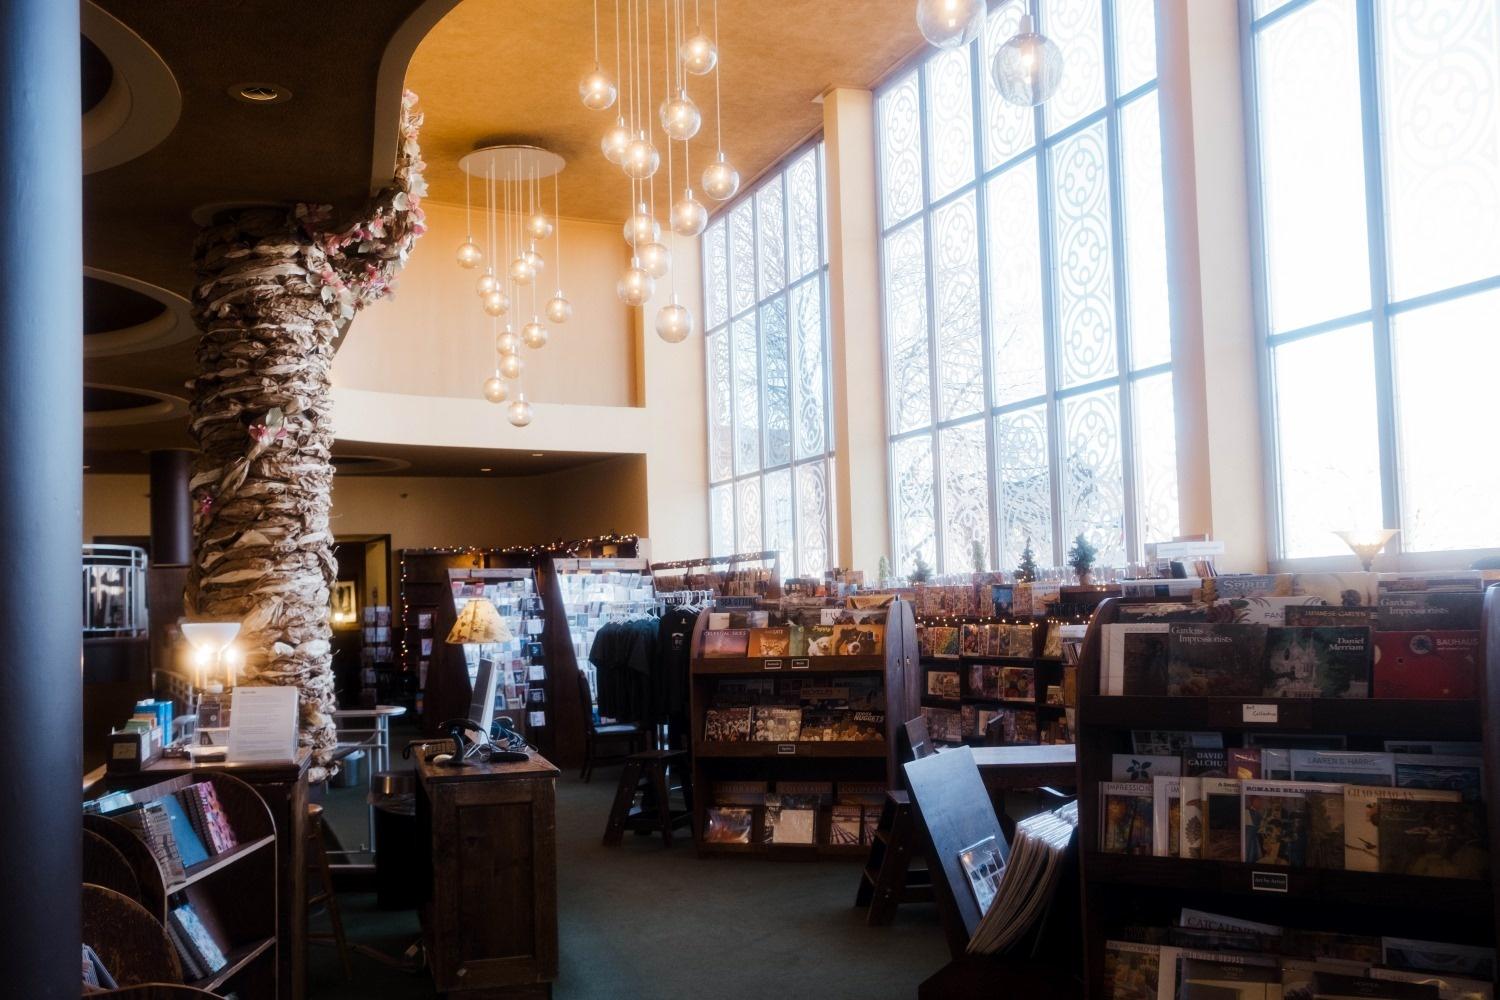 How To Open An Independent Bookstore